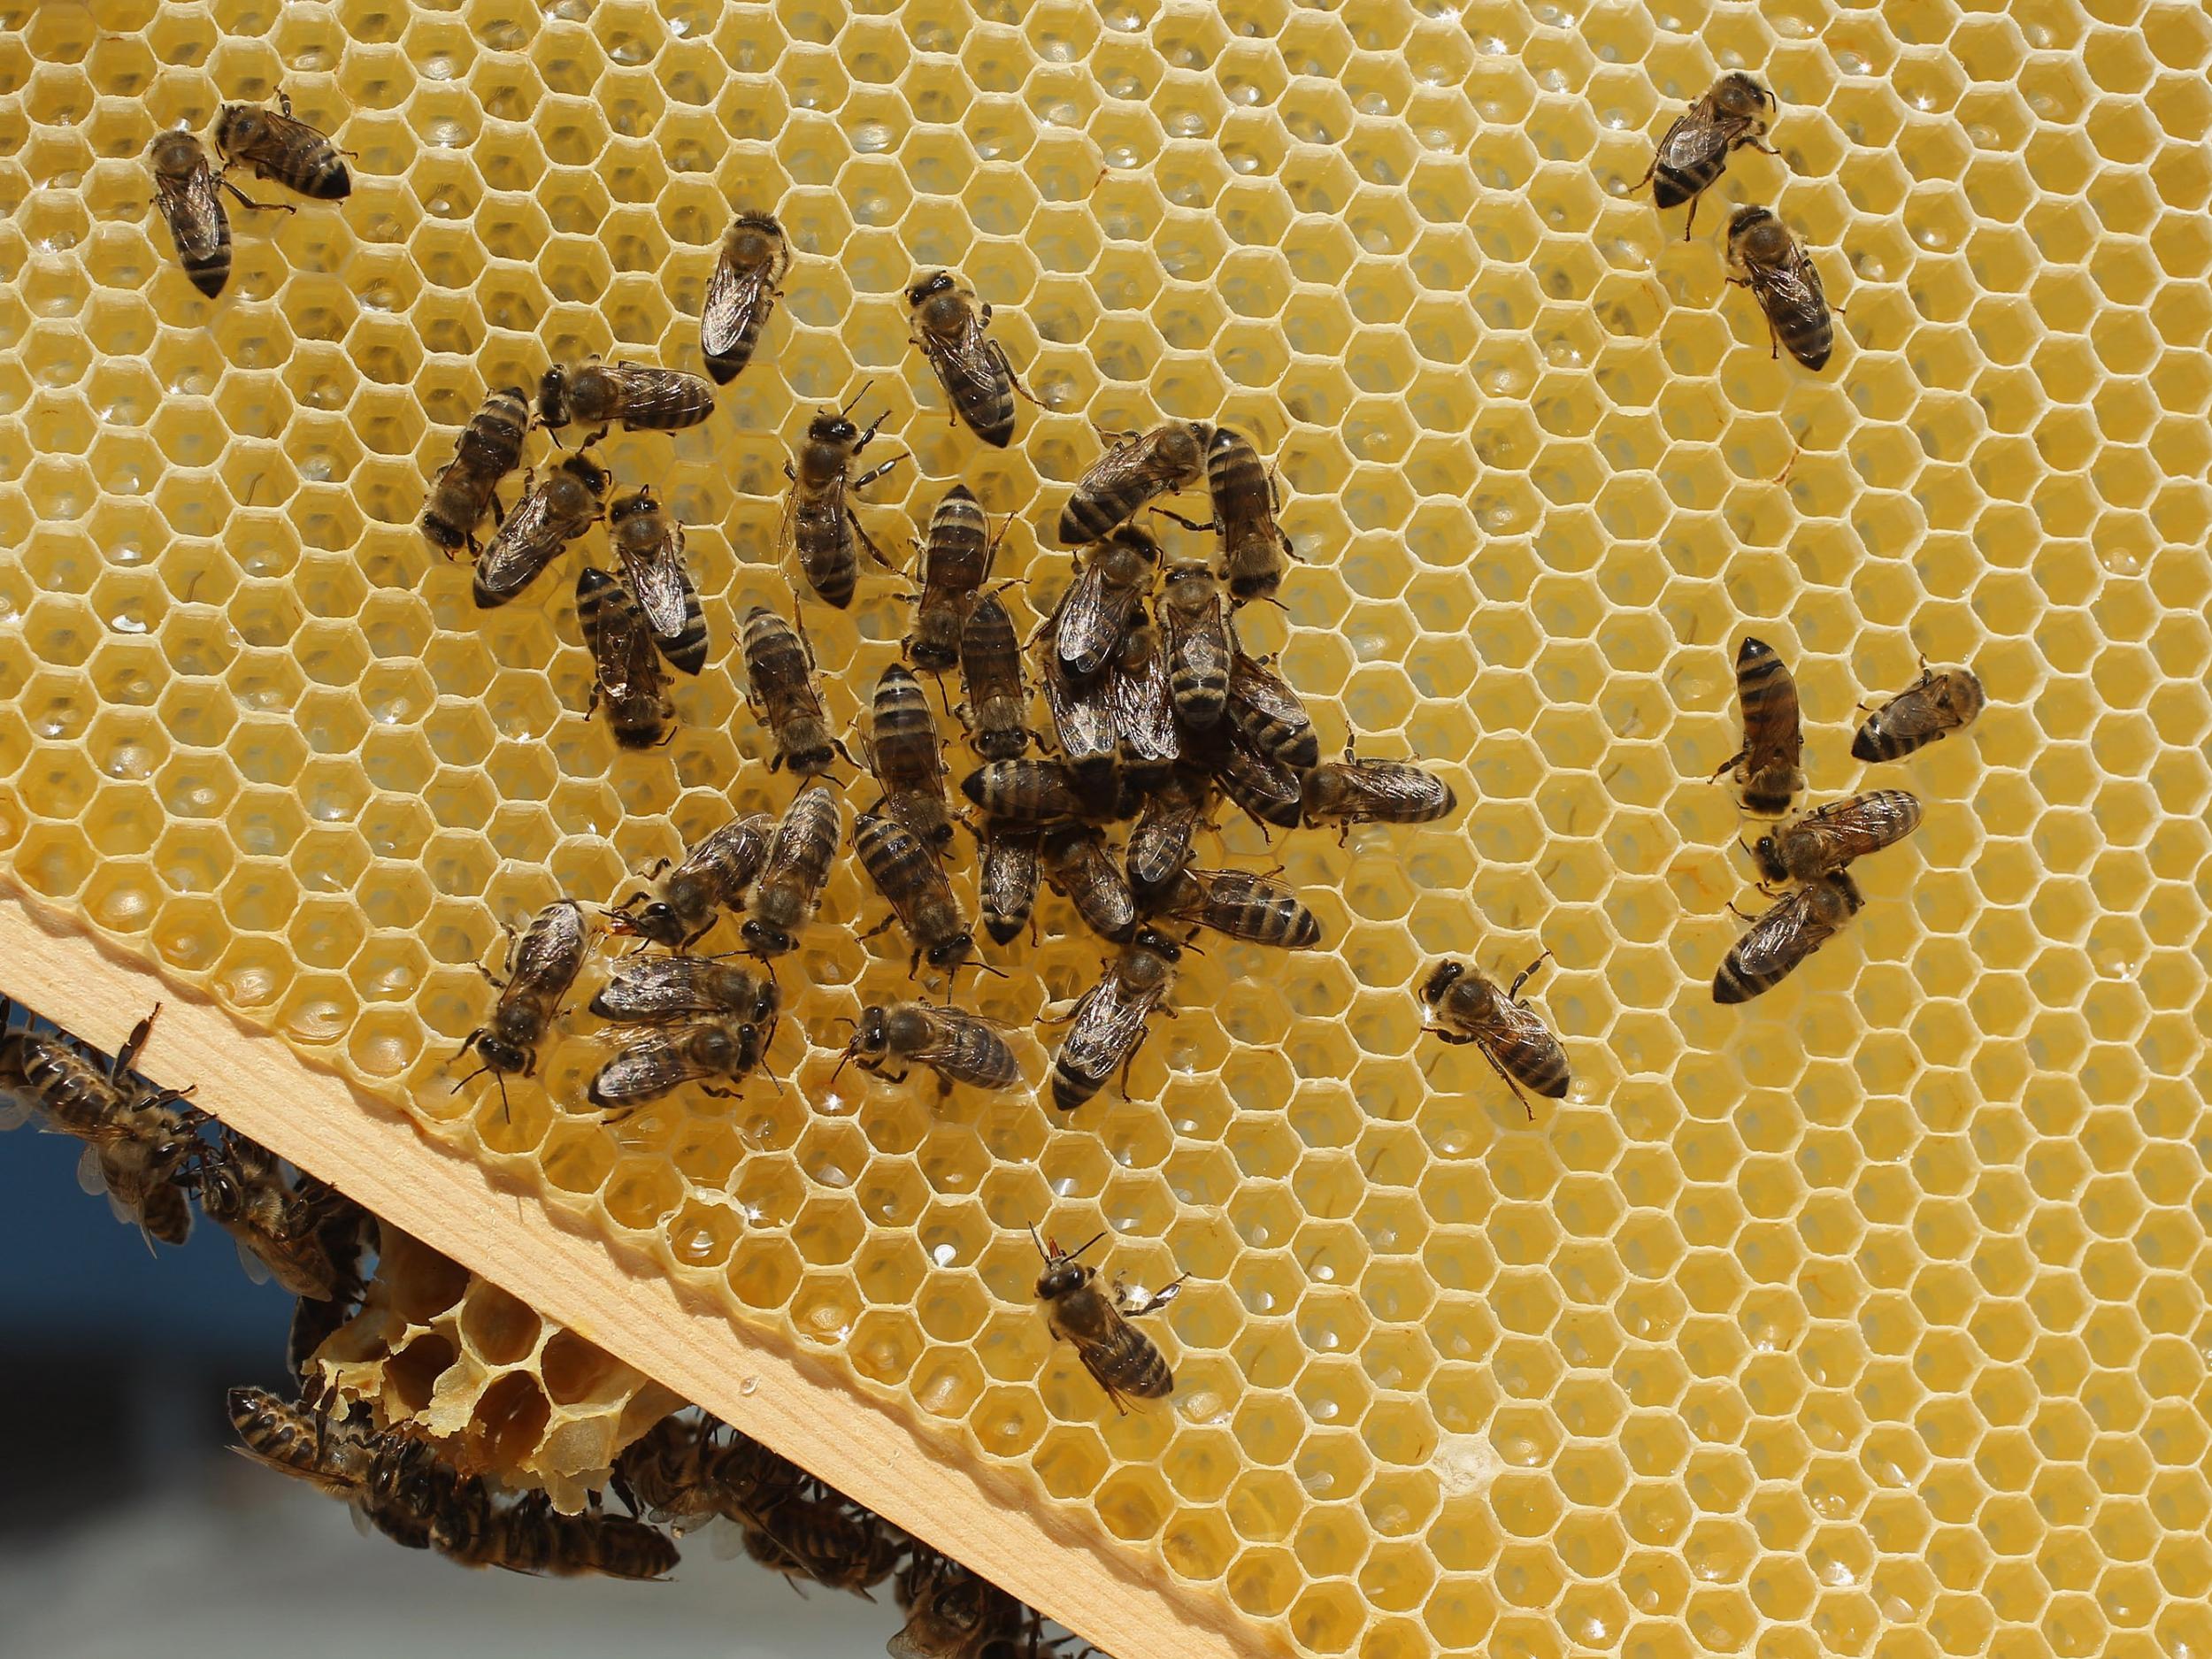 Honey bees may be more at risk from pesticides than previously imagined thanks to the low sugar diets they often eat